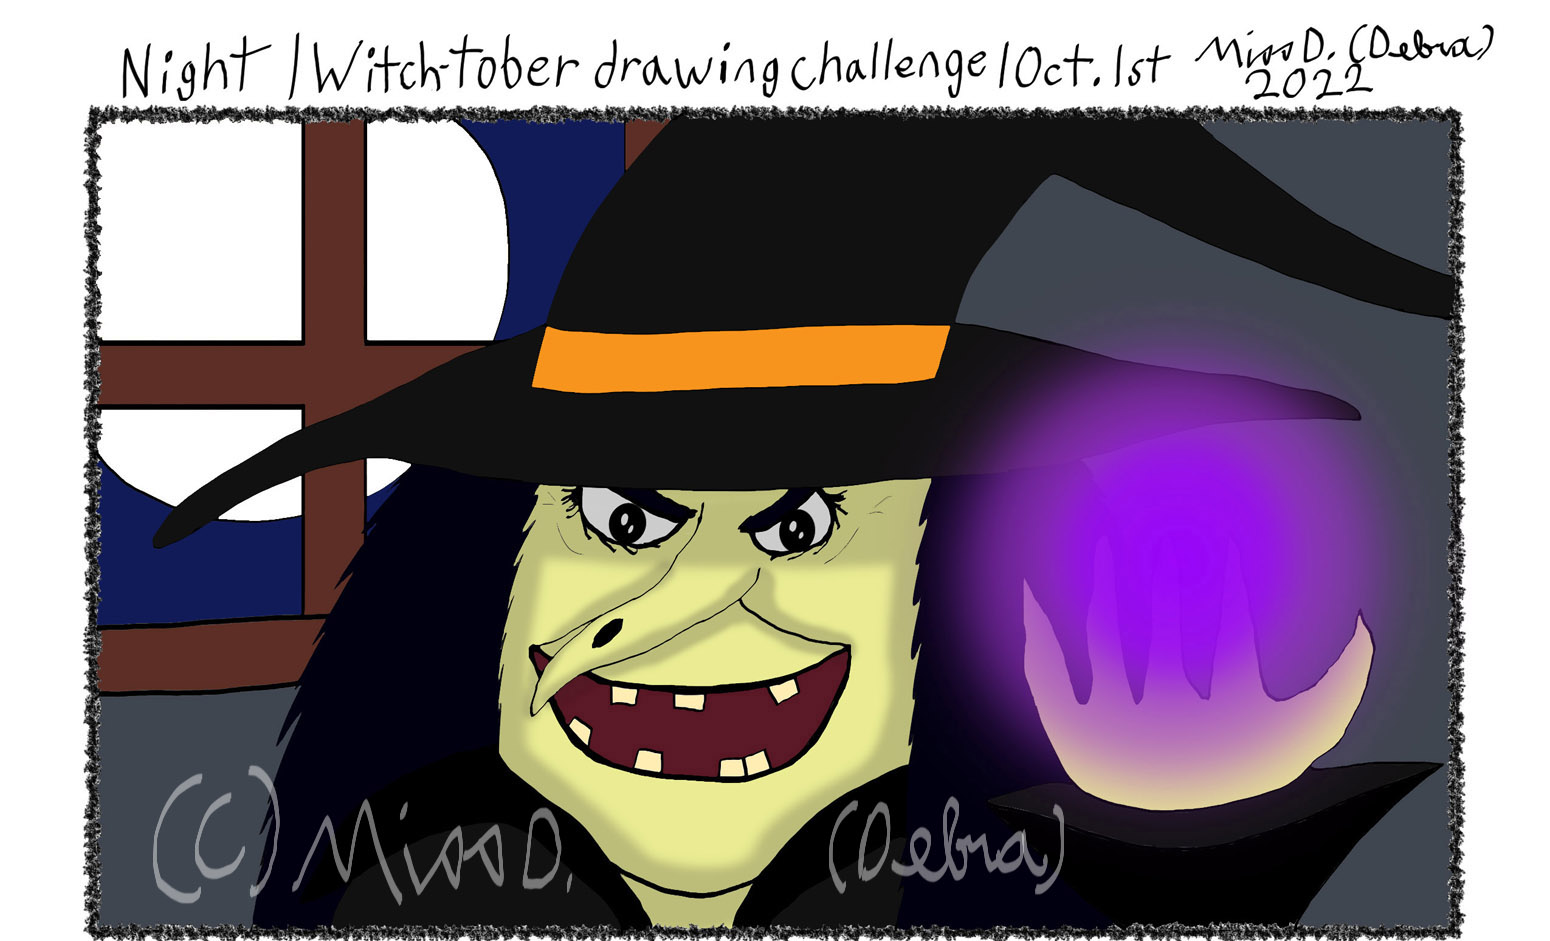 NIGHT - Witch-Tober Drawing Challenge - Oct. 1st